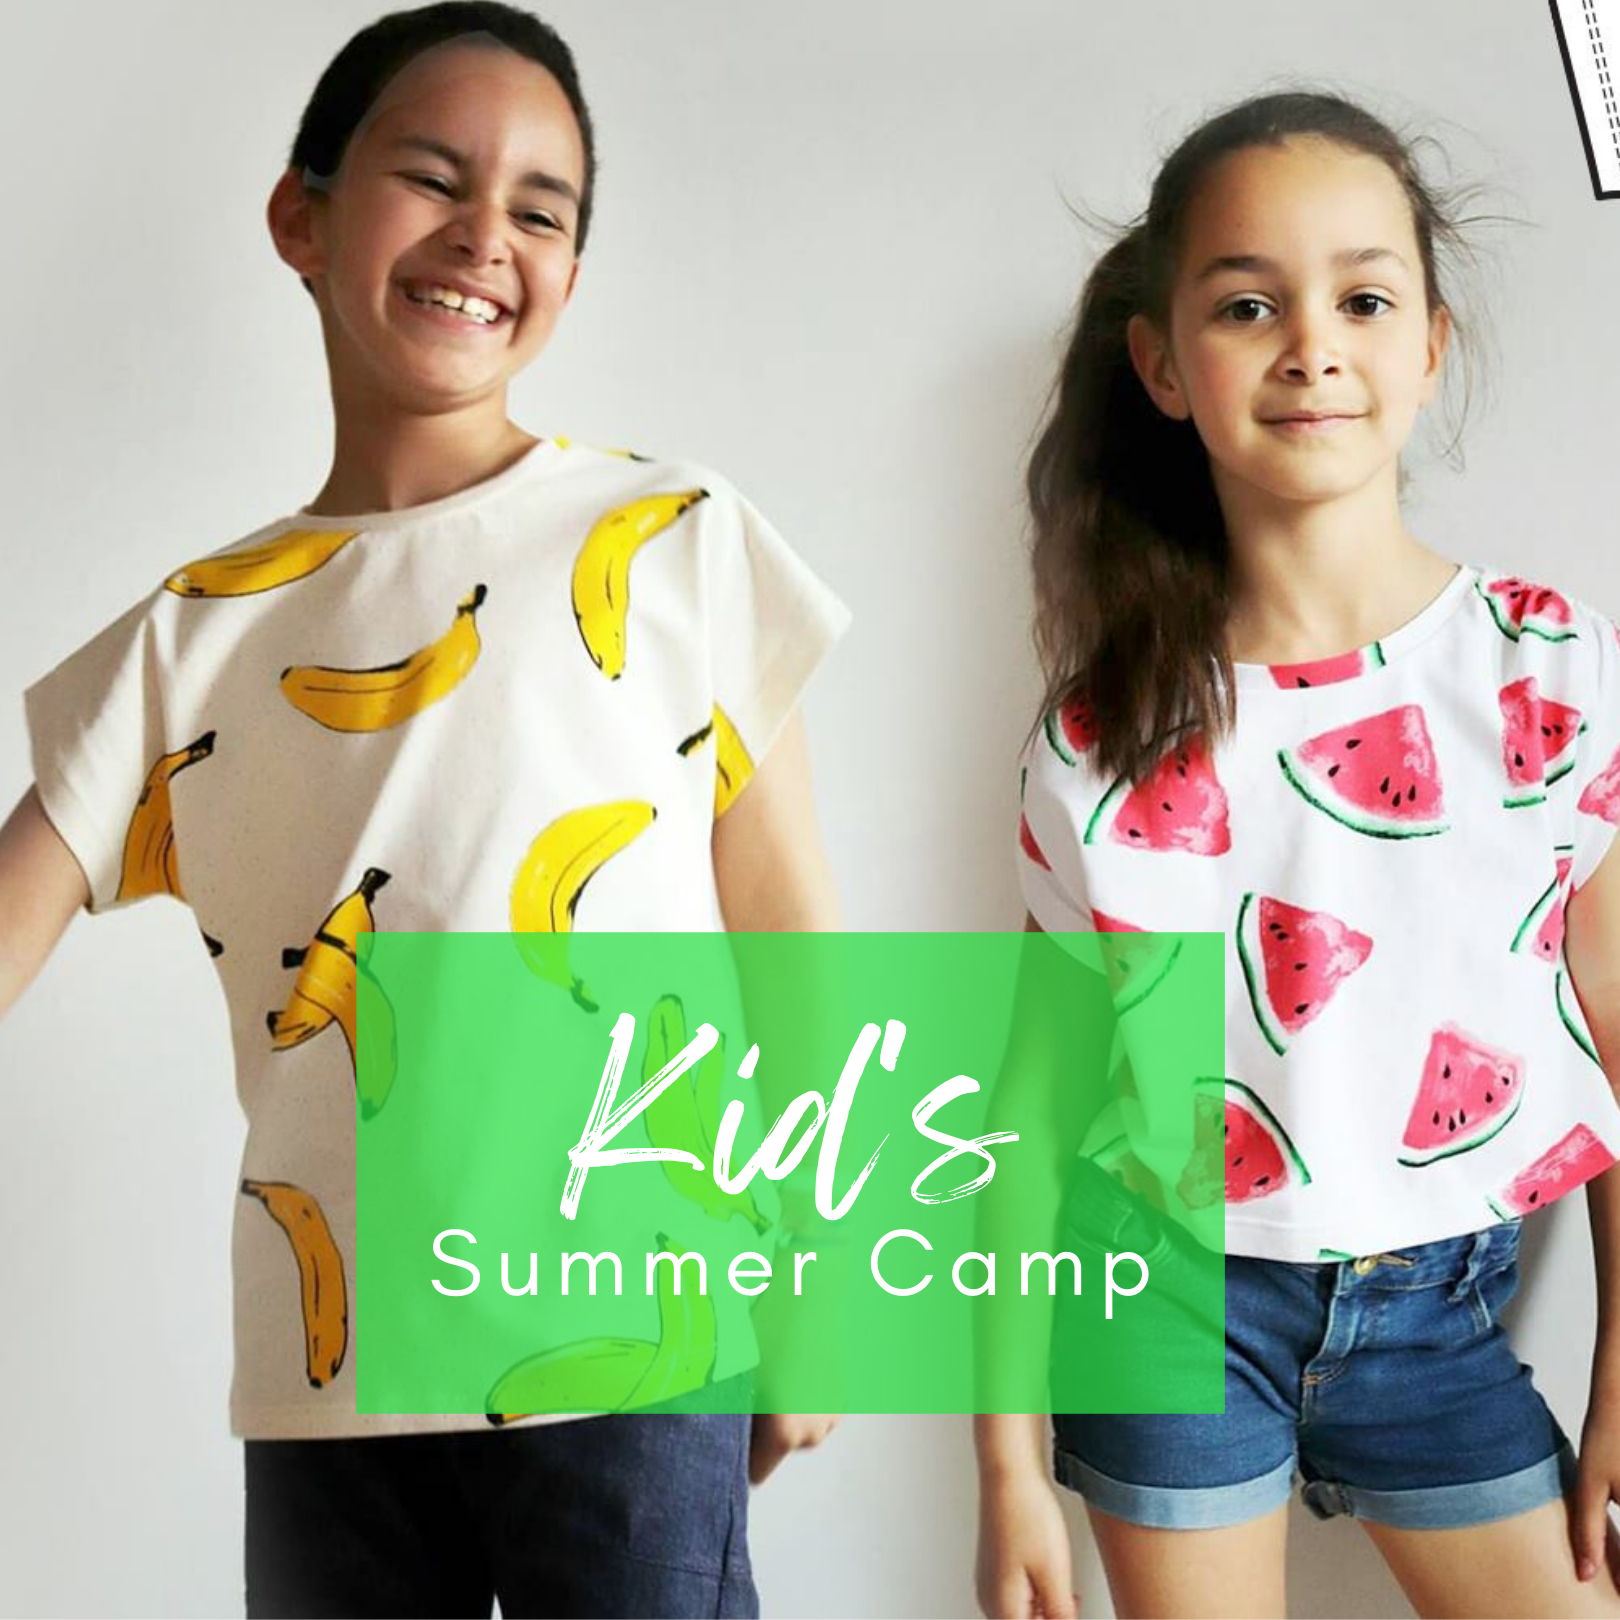 Kid's Sewing Summer Camp